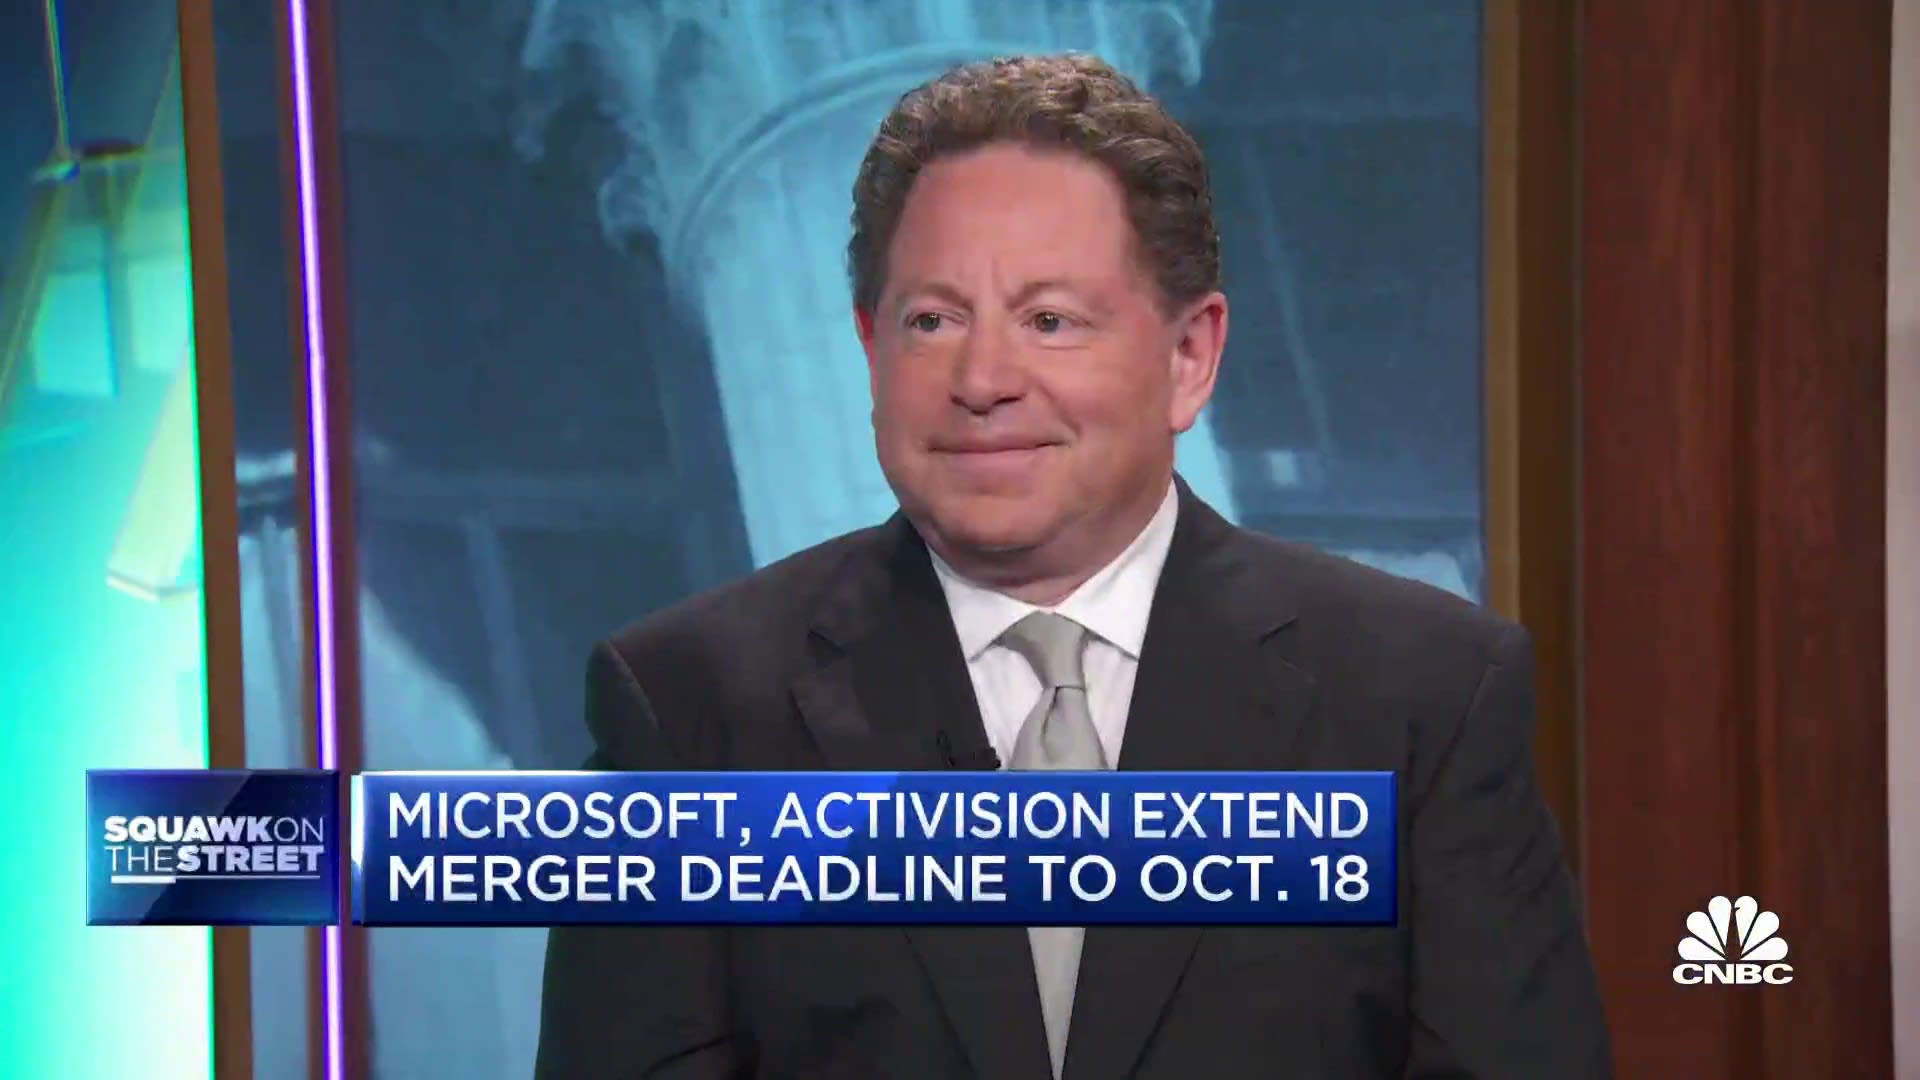 Microsoft and Activision-Blizzard Jointly Agree to Extend Merger Deadline  to October 18, 2023